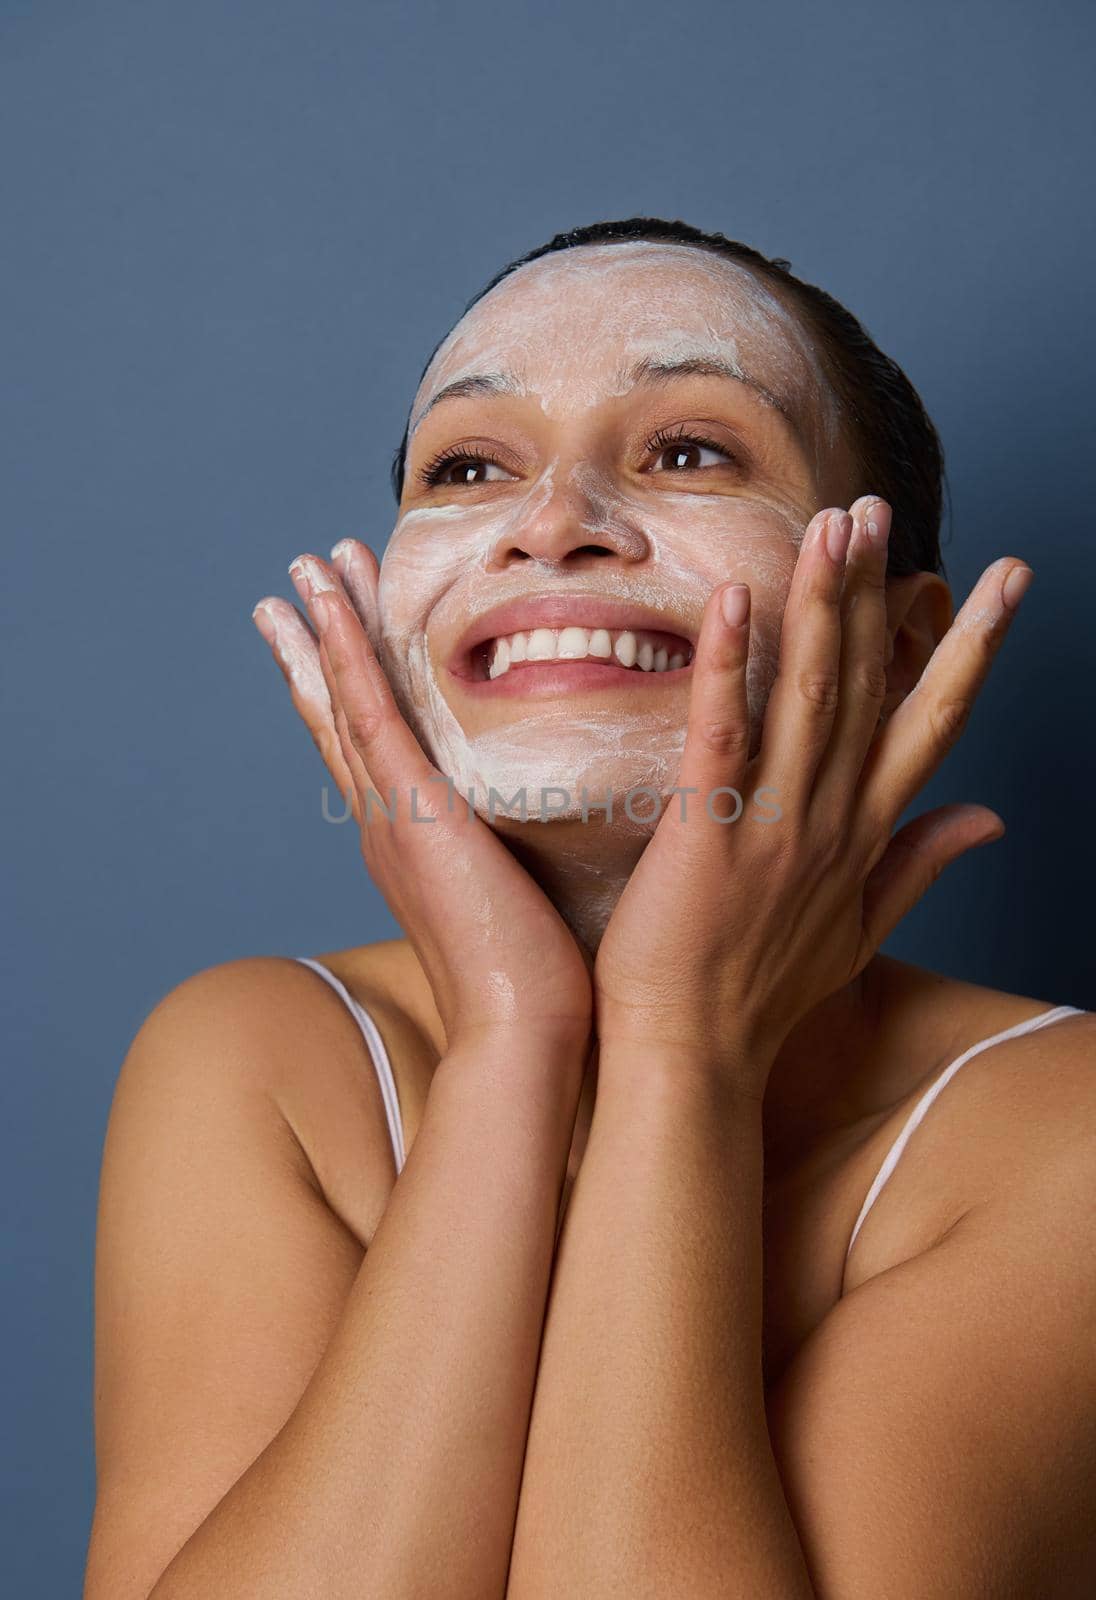 Beauty portrait of an attractive delightful wonderful woman with beautiful toothy smile and healthy skin removing make-up and cleaning her face with facial exfoliant scrub cleanser, on blue background by artgf